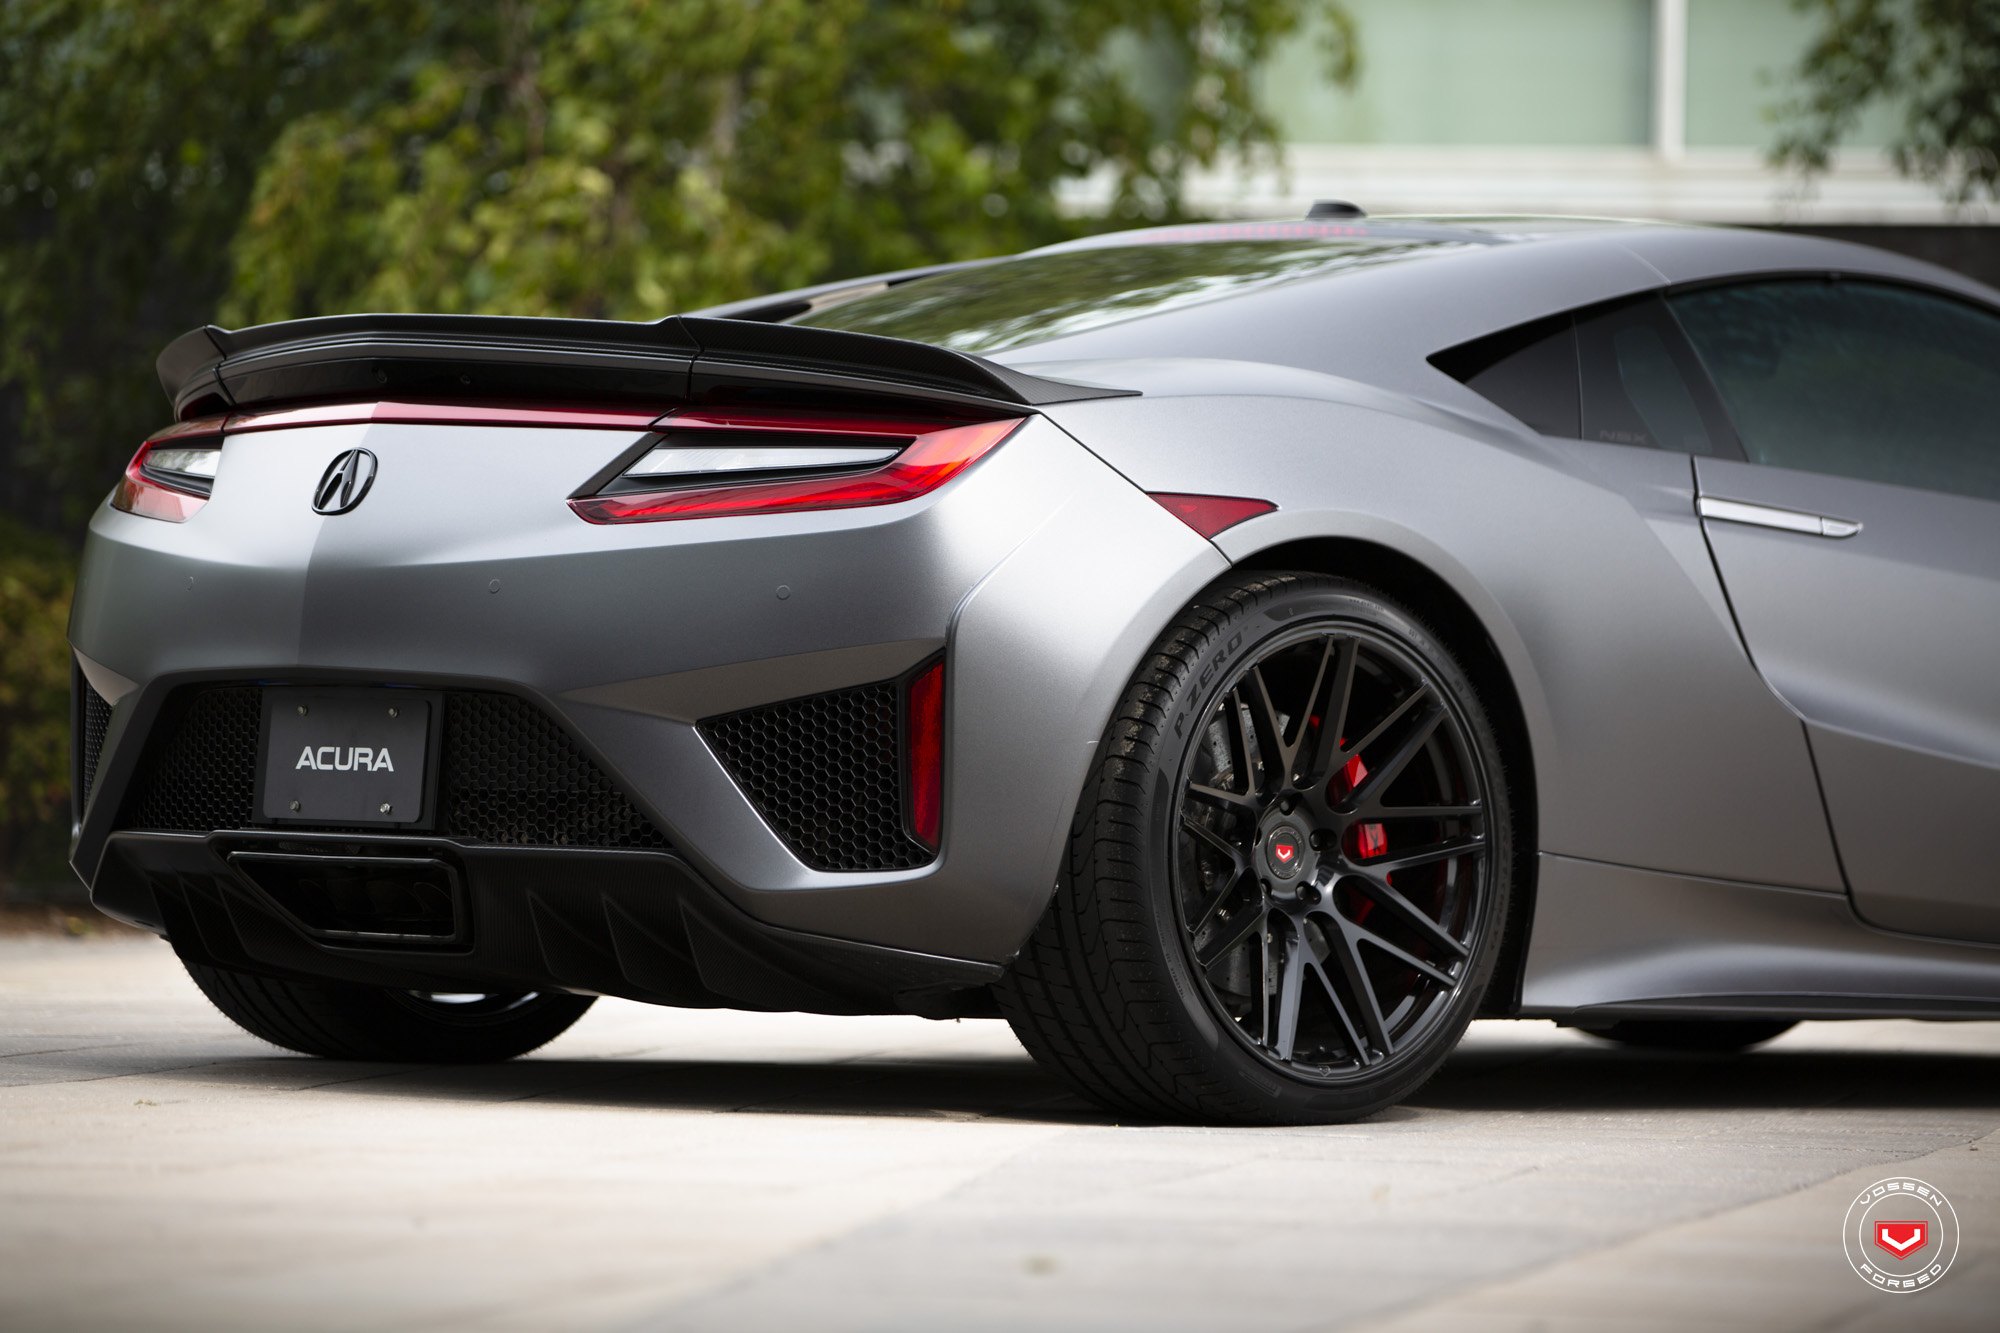 Gray Acura NSX with Aftermarket Rear Diffuser - Photo by Vossen